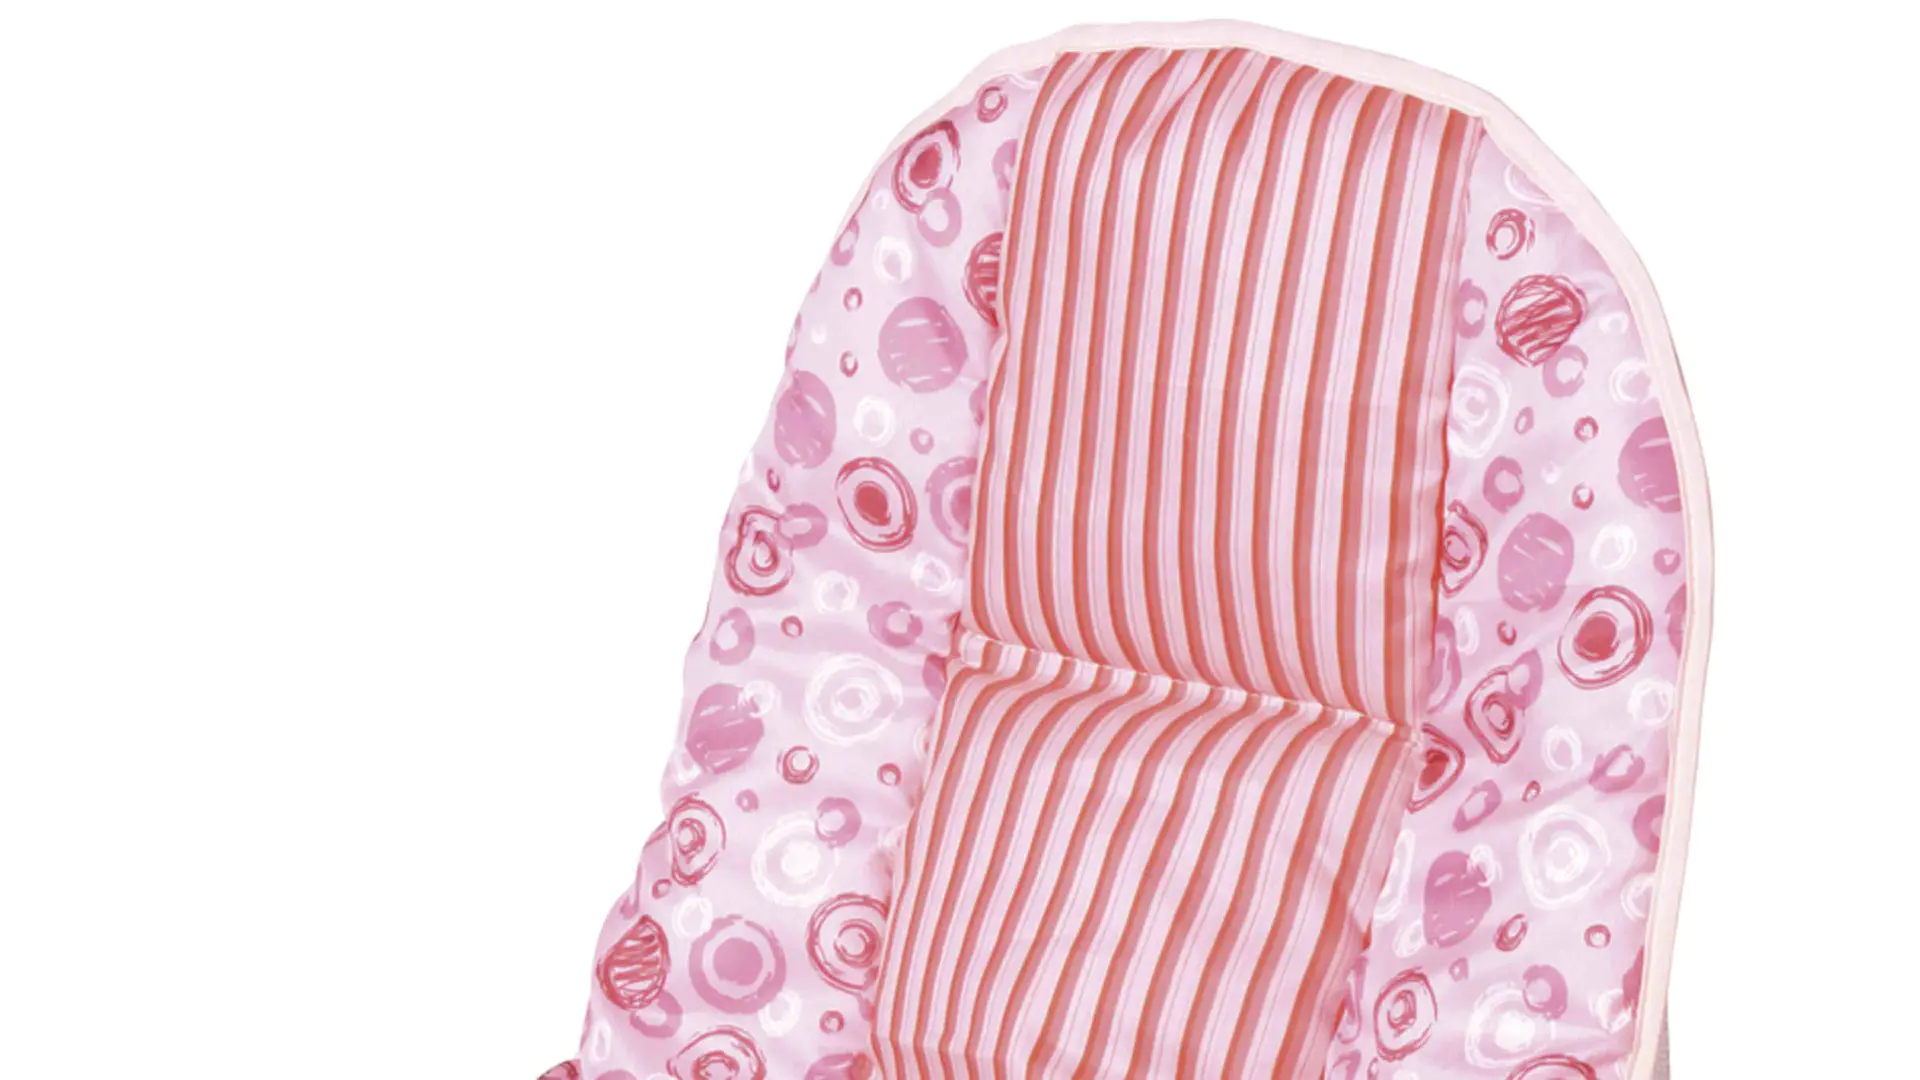 Aoqi baby bouncer and rocker factory price for toddler